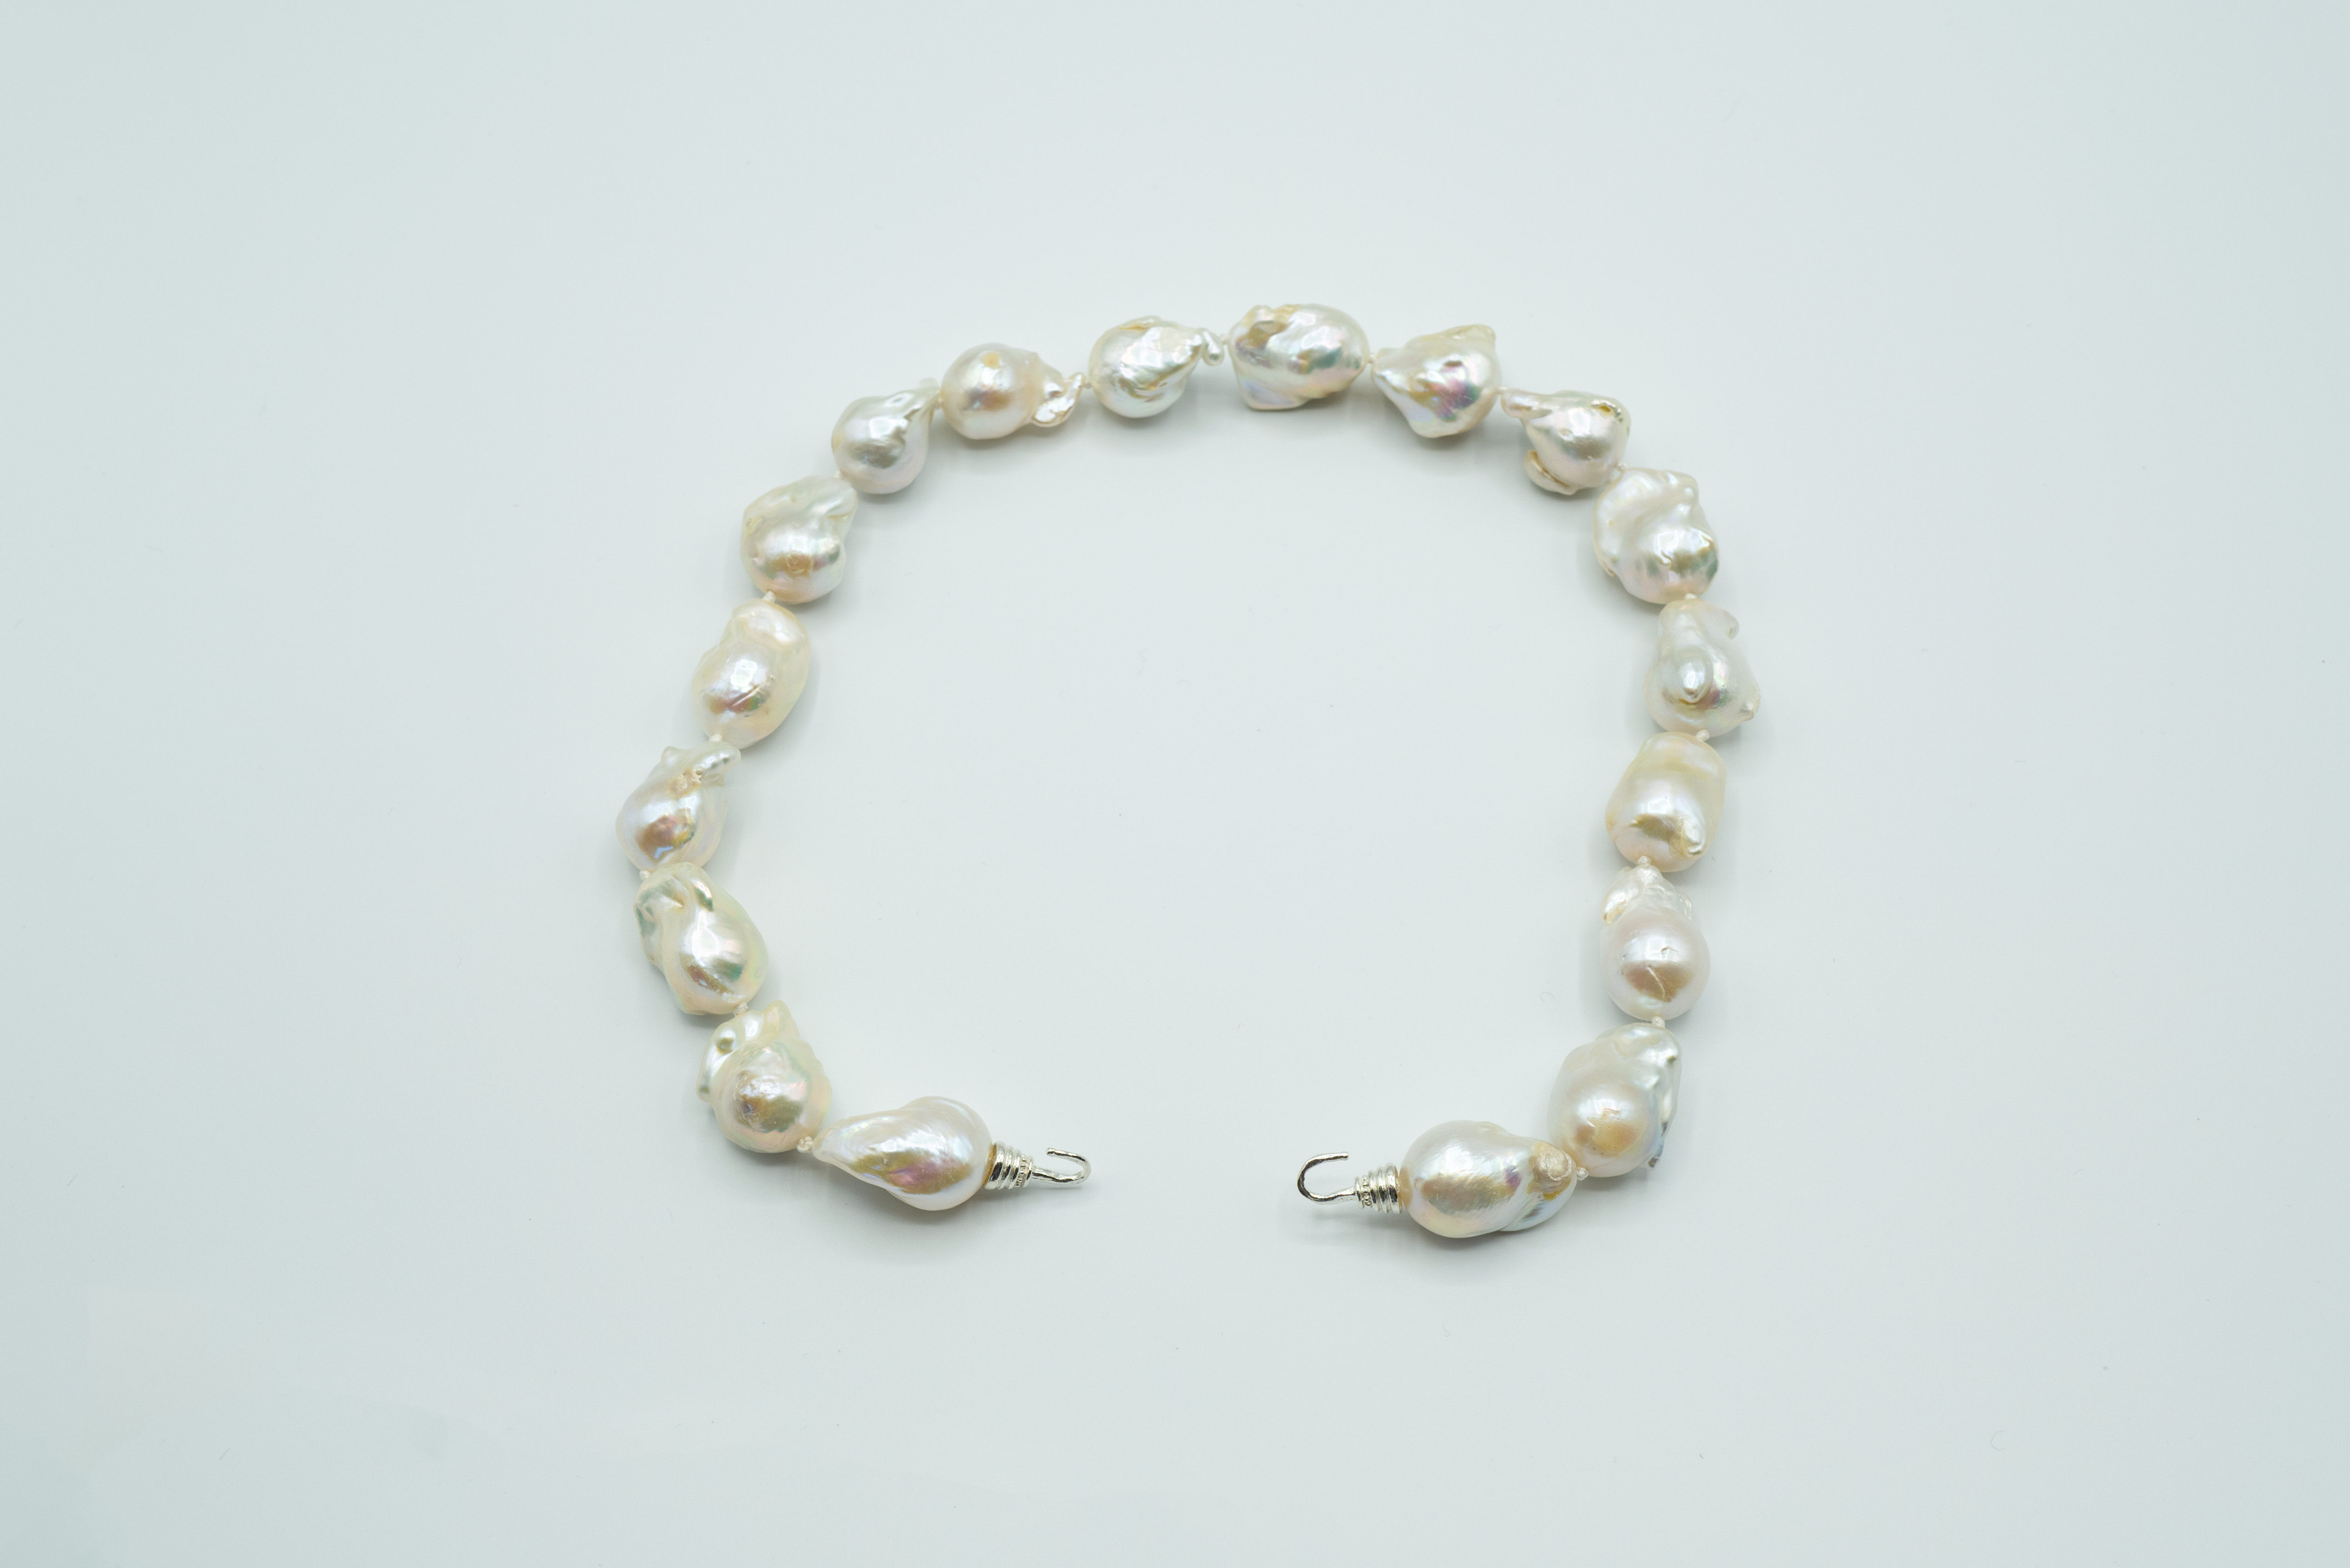 Jumbo Baroque Drop Shape Pearls with Sterling Hooks. Refinded Freshwater Vultivation